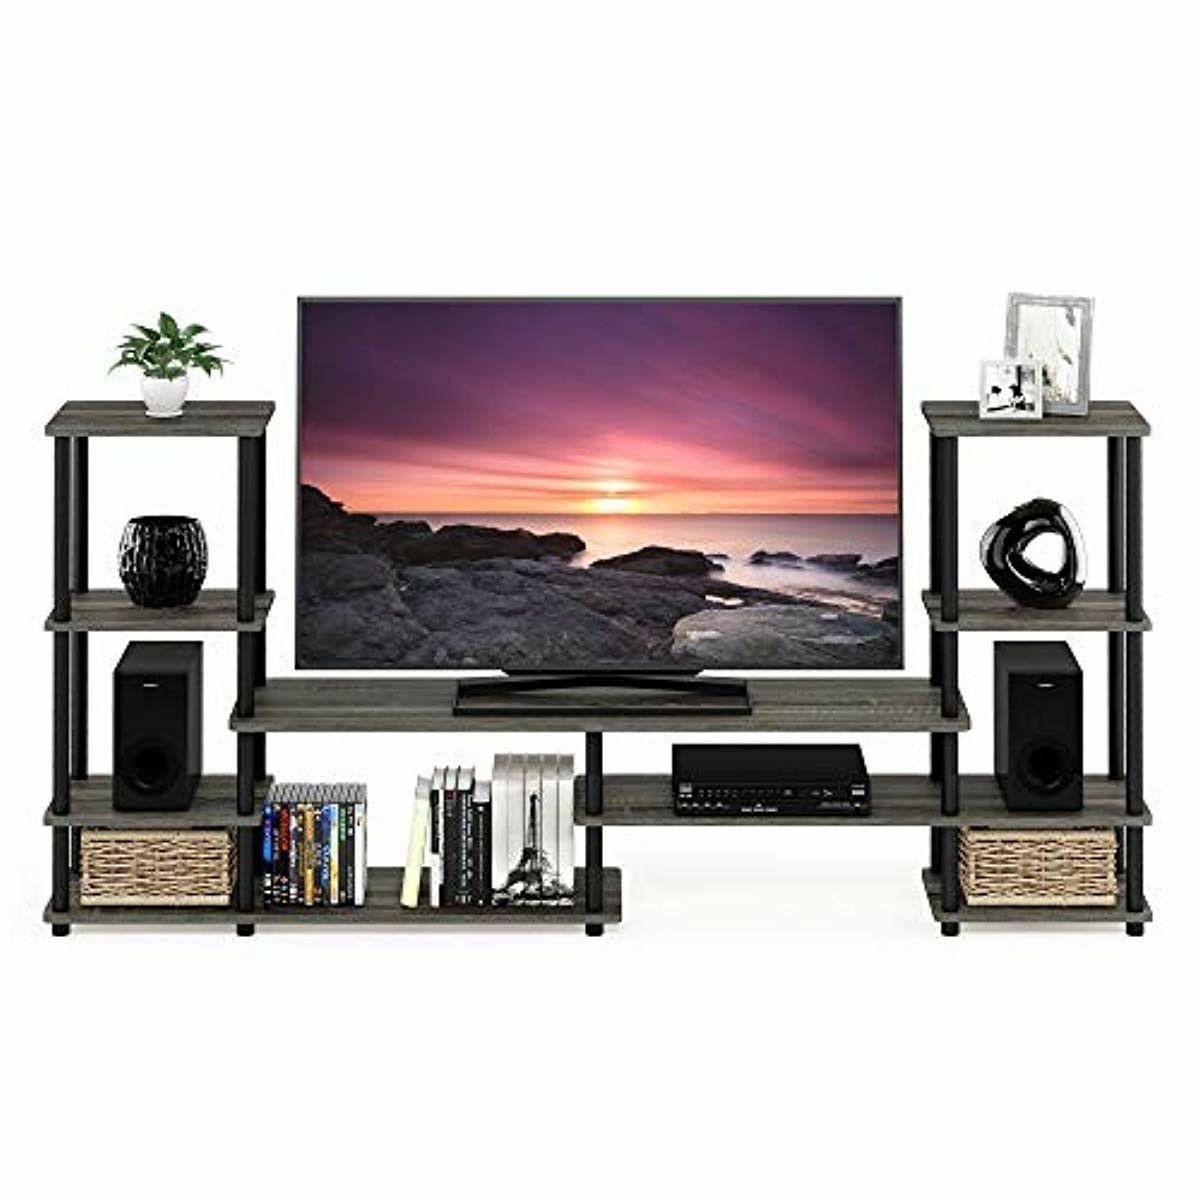 Grey Entertainment Center 50 Inch Tv Stand Tall Modern Luxury Within Wooden Tv Stands For 50 Inch Tv (View 3 of 15)